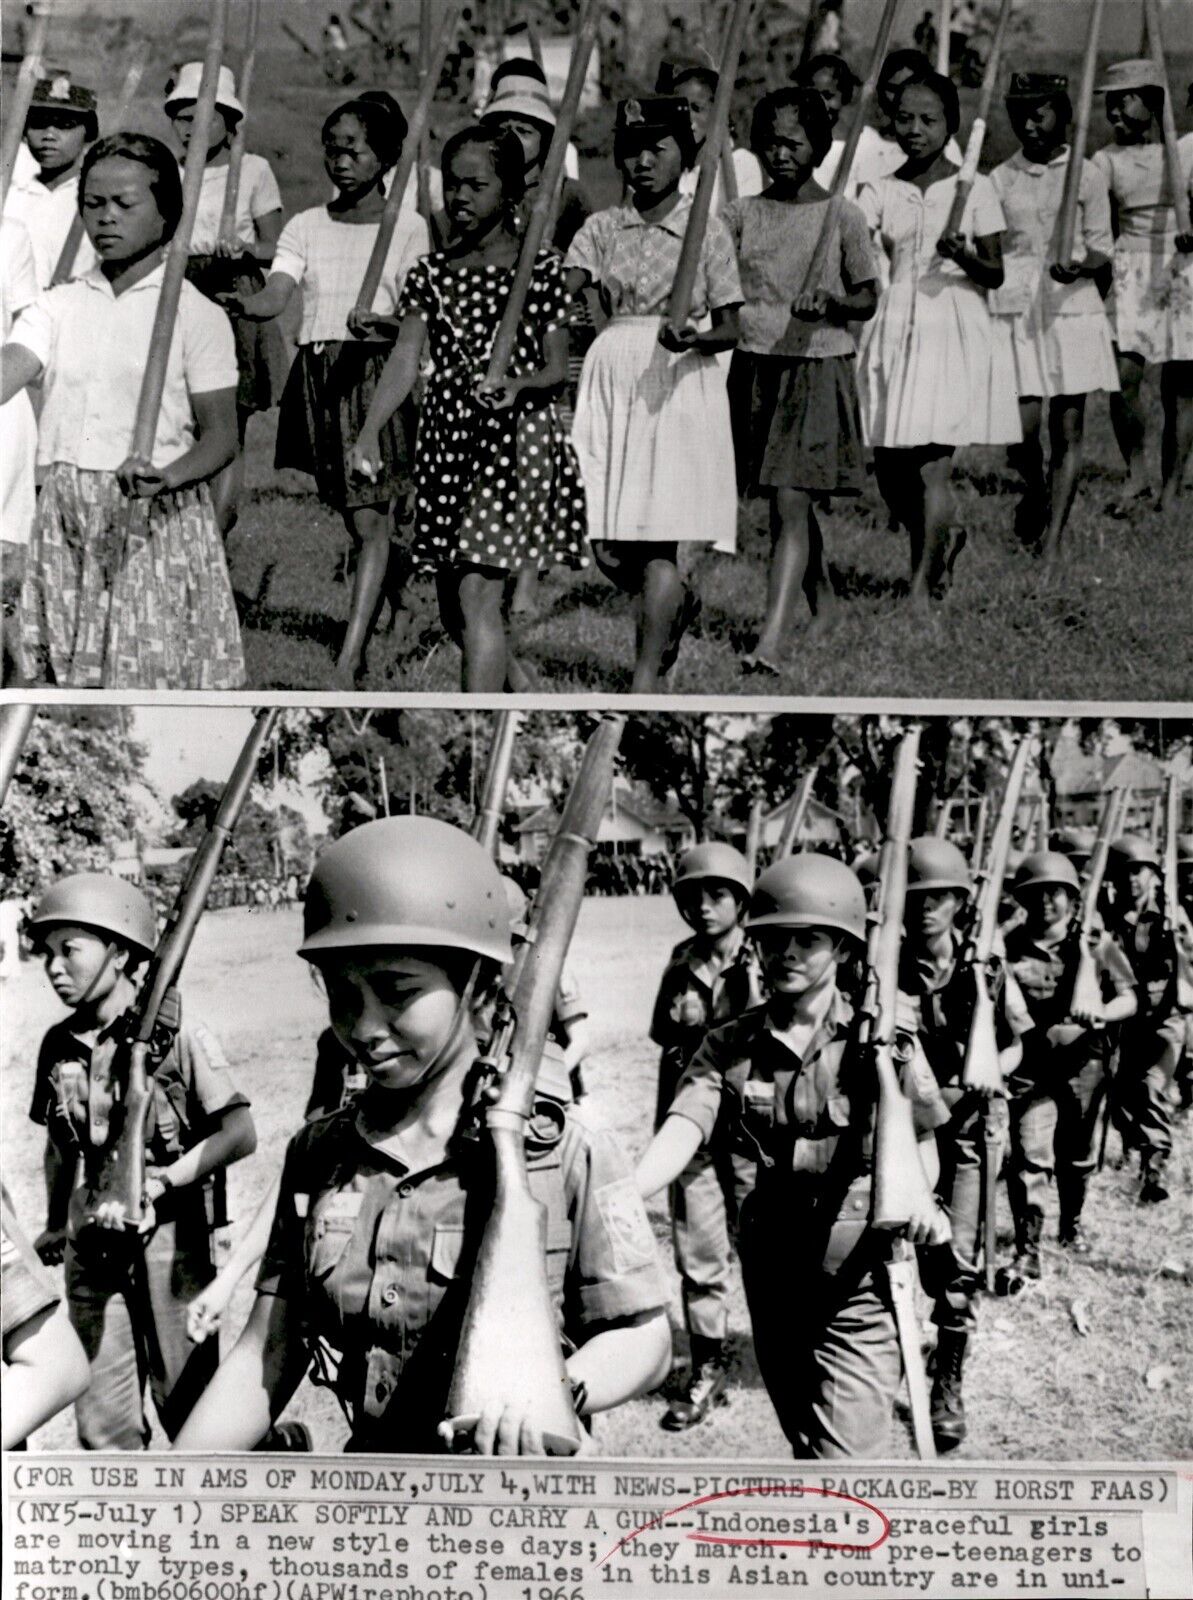 LG980 1966 AP Wire Photo SPEAK SOFTLY AND CARRY A GUN INDONESIAN WOMEN SOLDIERS